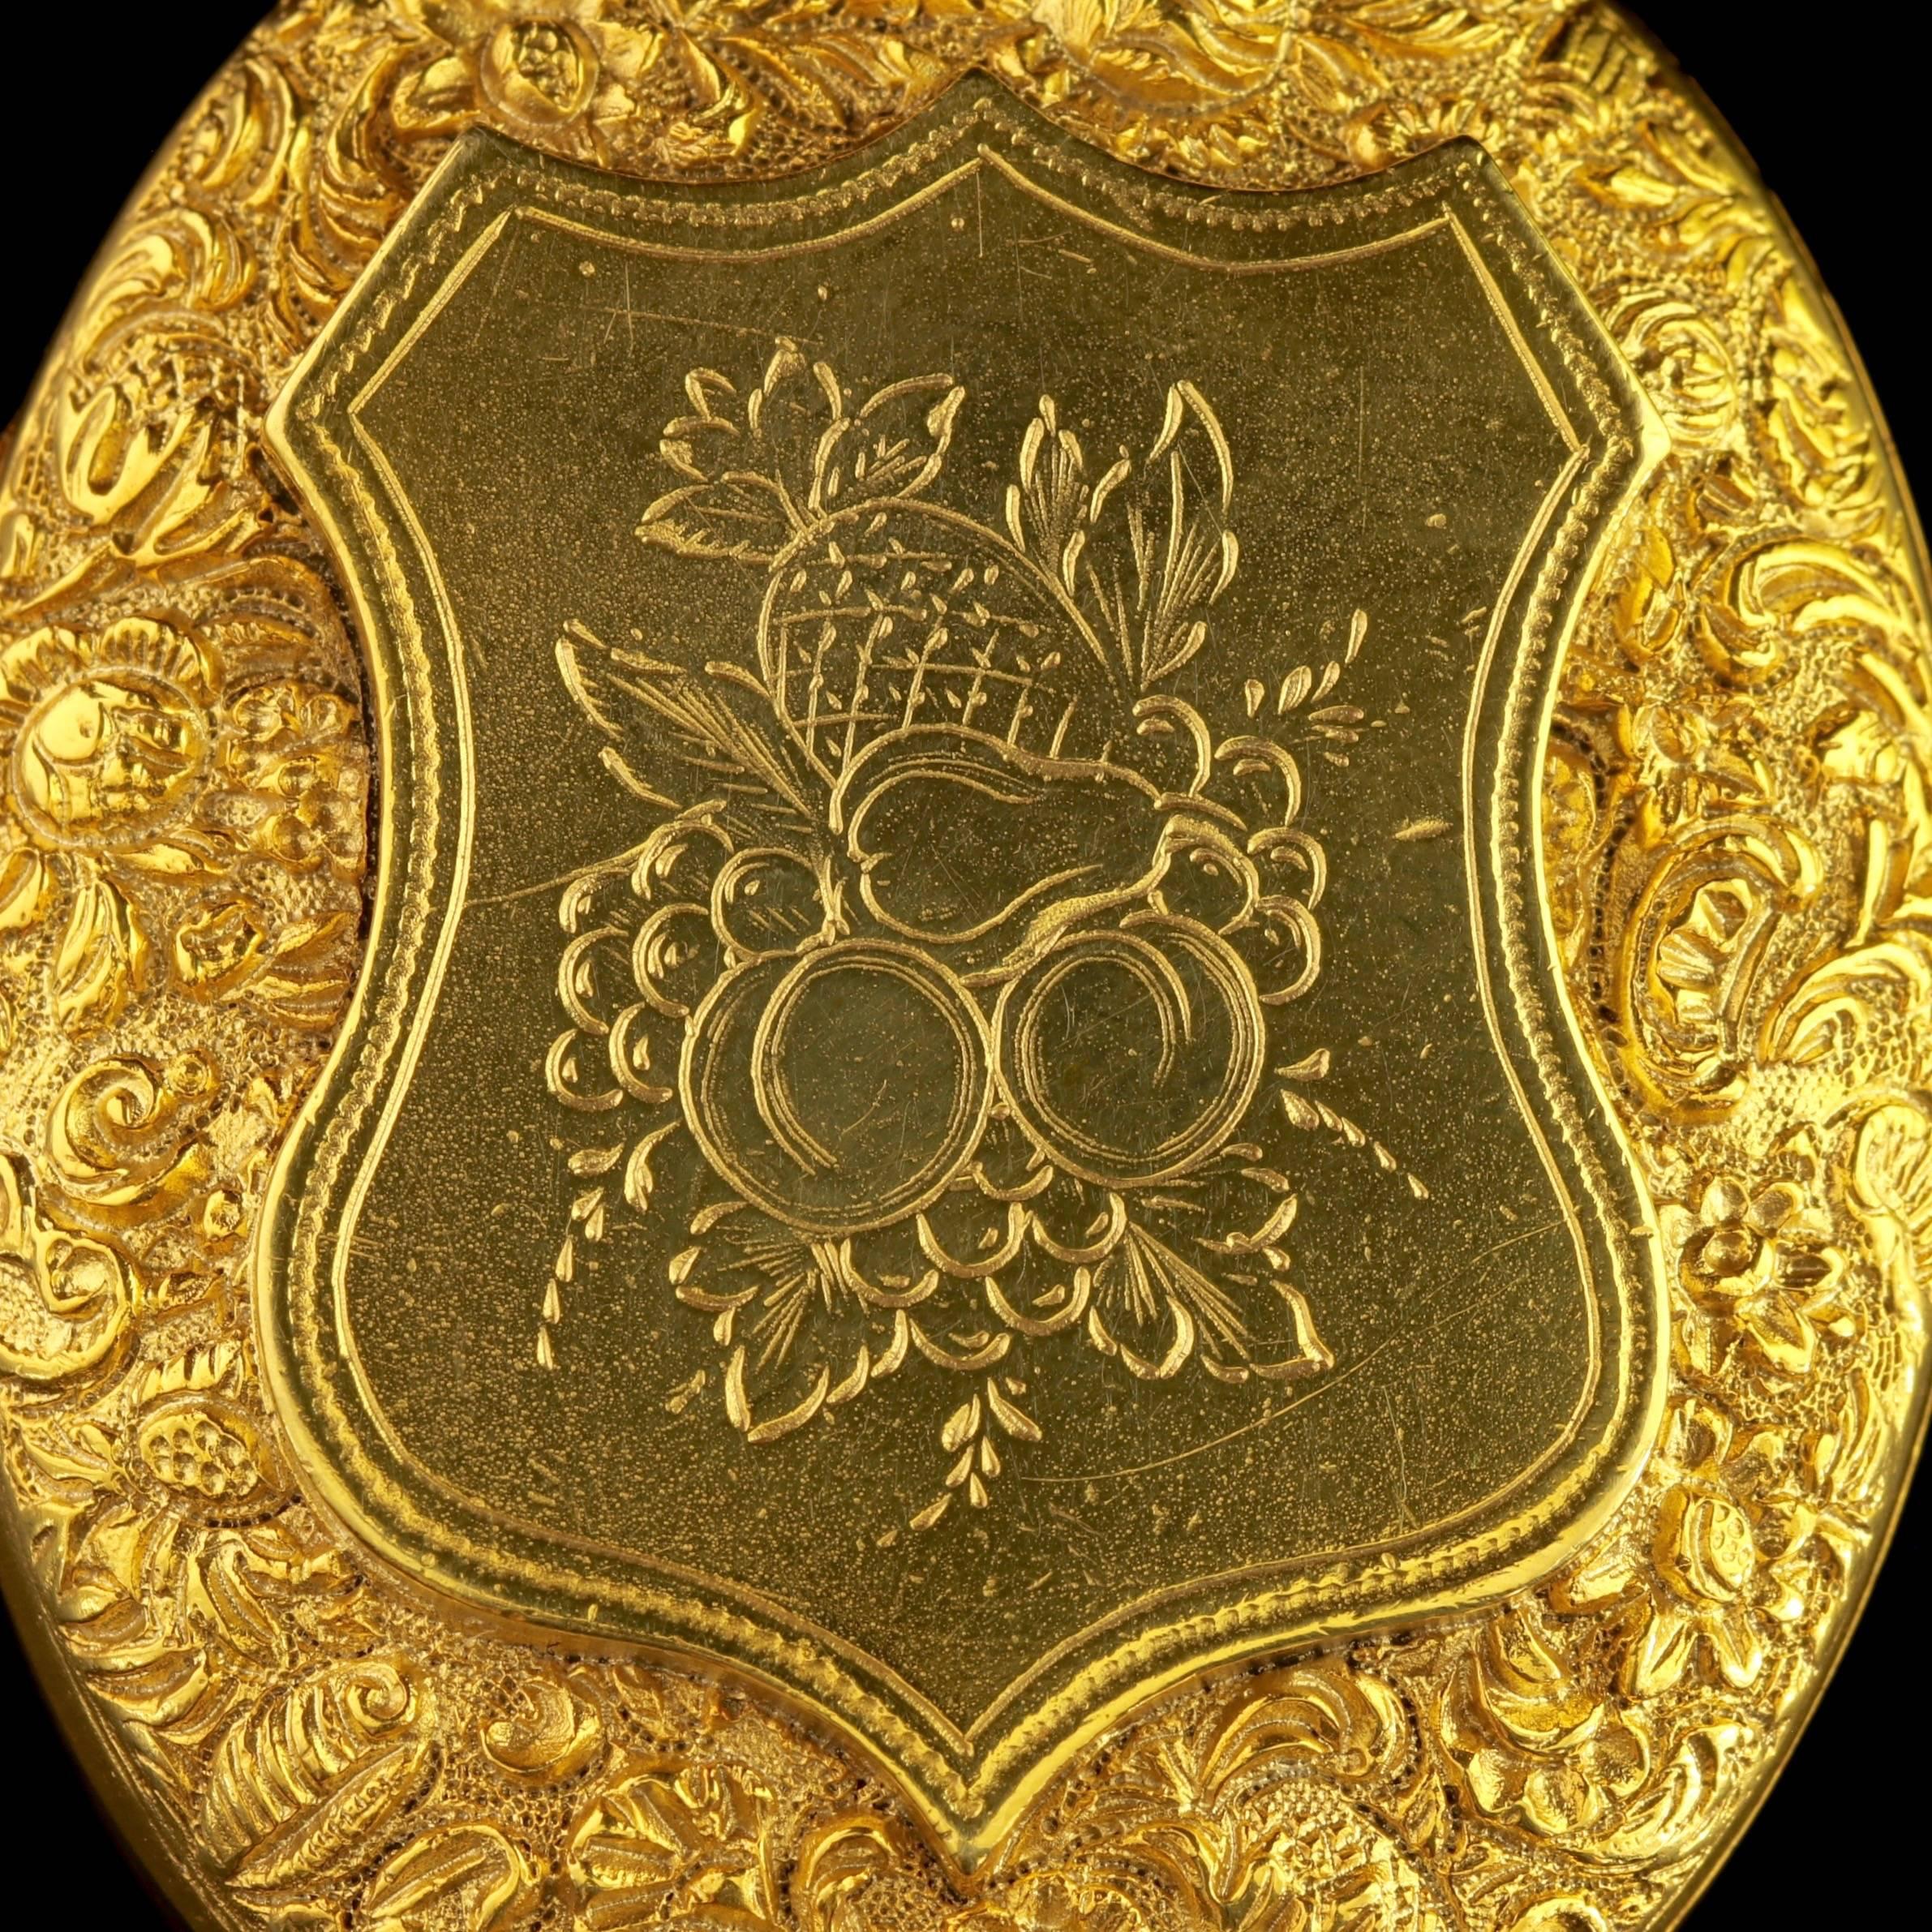 To read more please click continue reading below-

This genuine antique Victorian Fruit locket is set in Sterling Silver and gilded in 18ct Yellow Gold, Circa 1880.

The central piece depicts a lovely engraved fruit display of apples, grapes pears